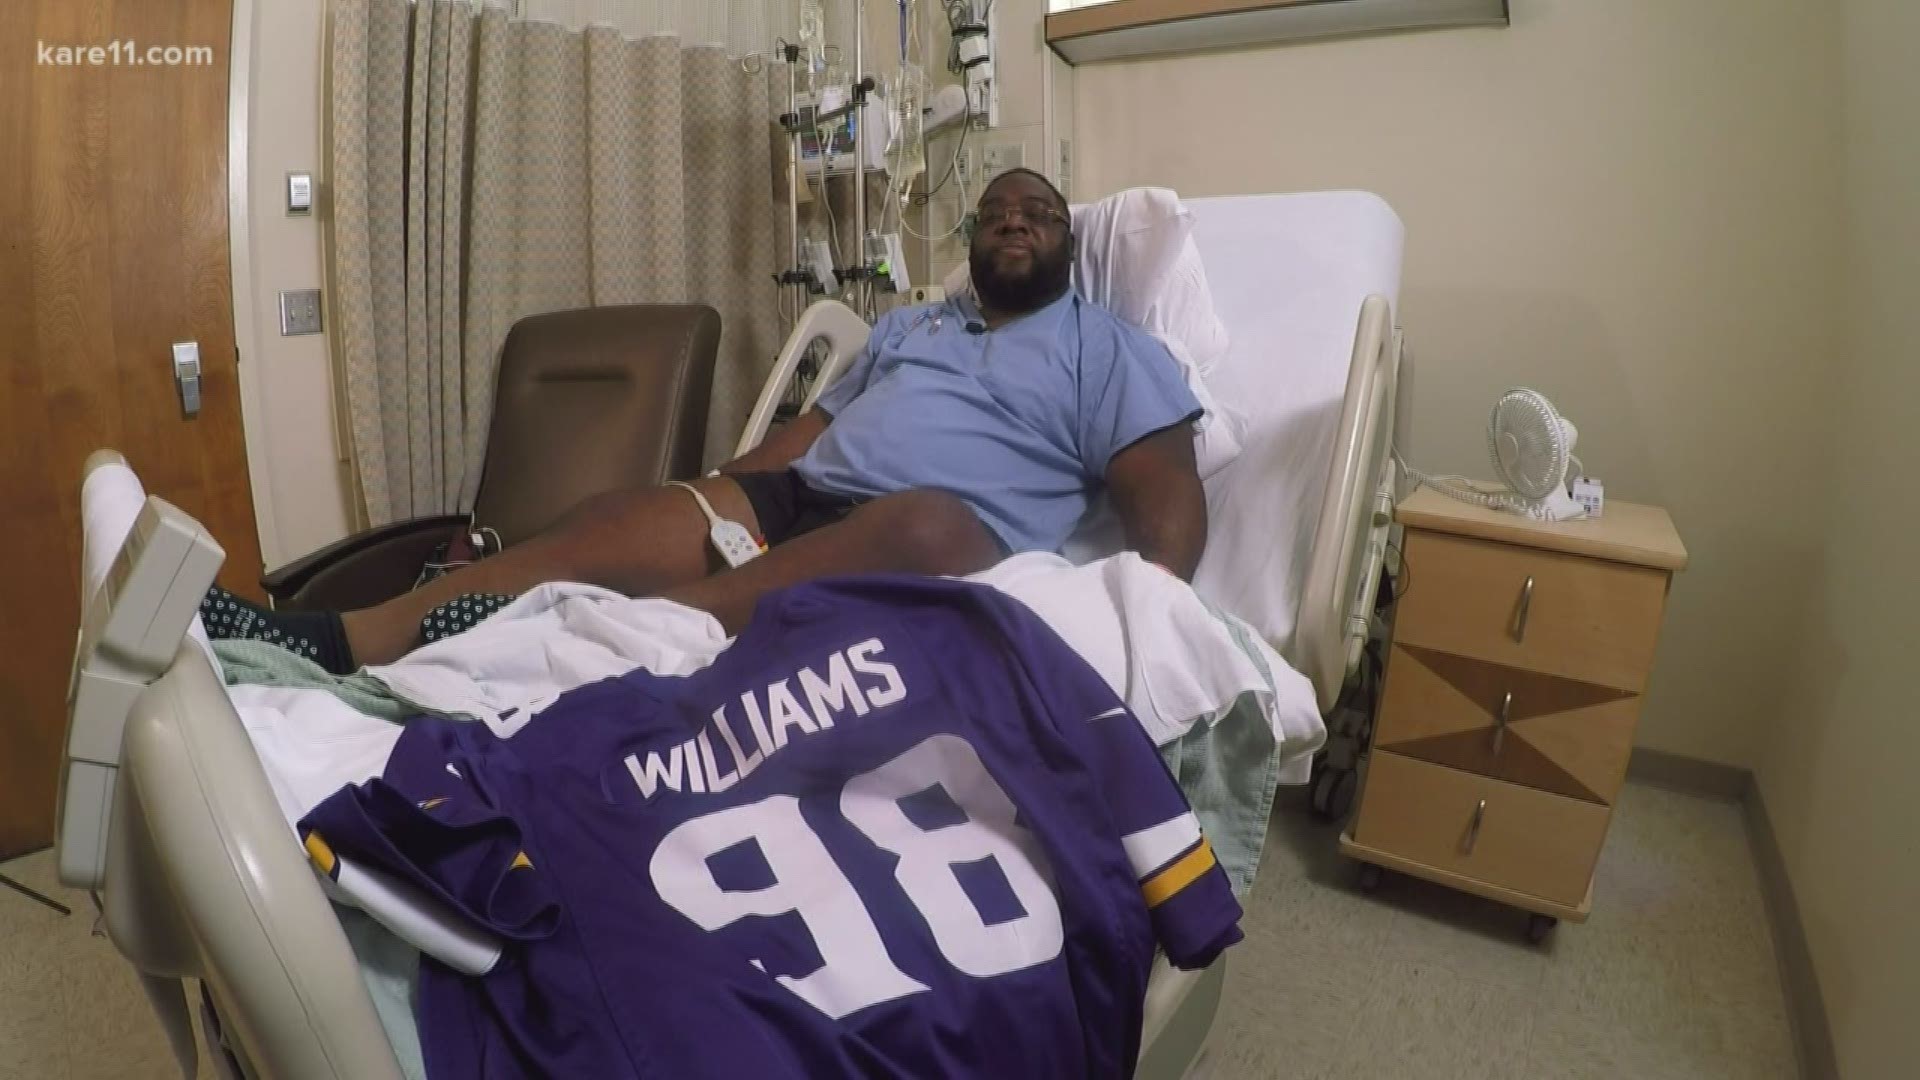 “I woke up the next day and felt like I could go back and play again," the former Vikings and Gophers player said.